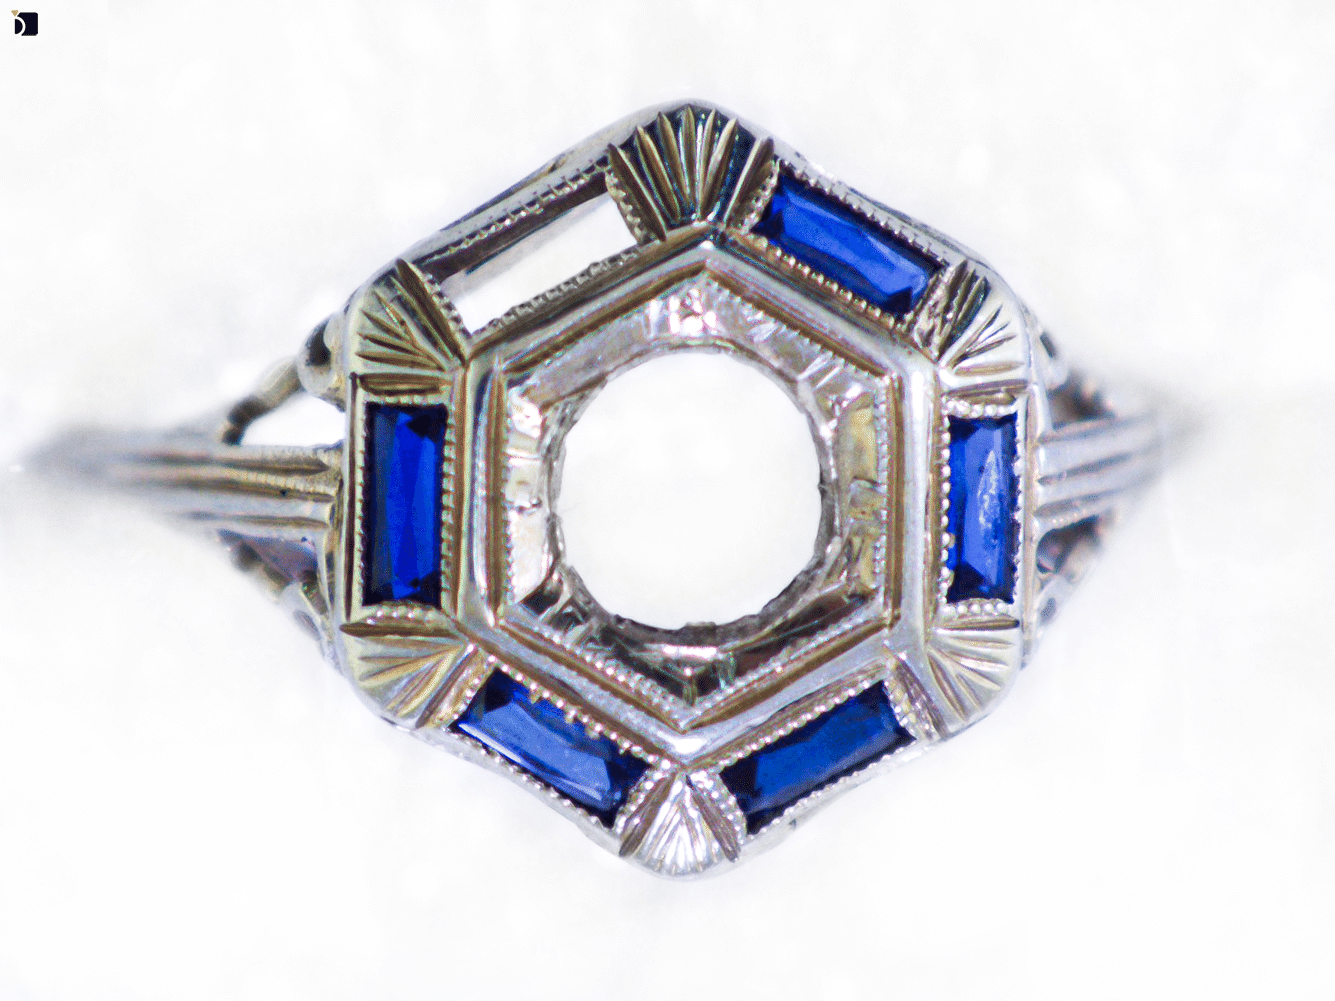 Image showing the Before #123 of a Ring with Baguette Blue Sapphire and Green Sapphire Gemstone Replacement